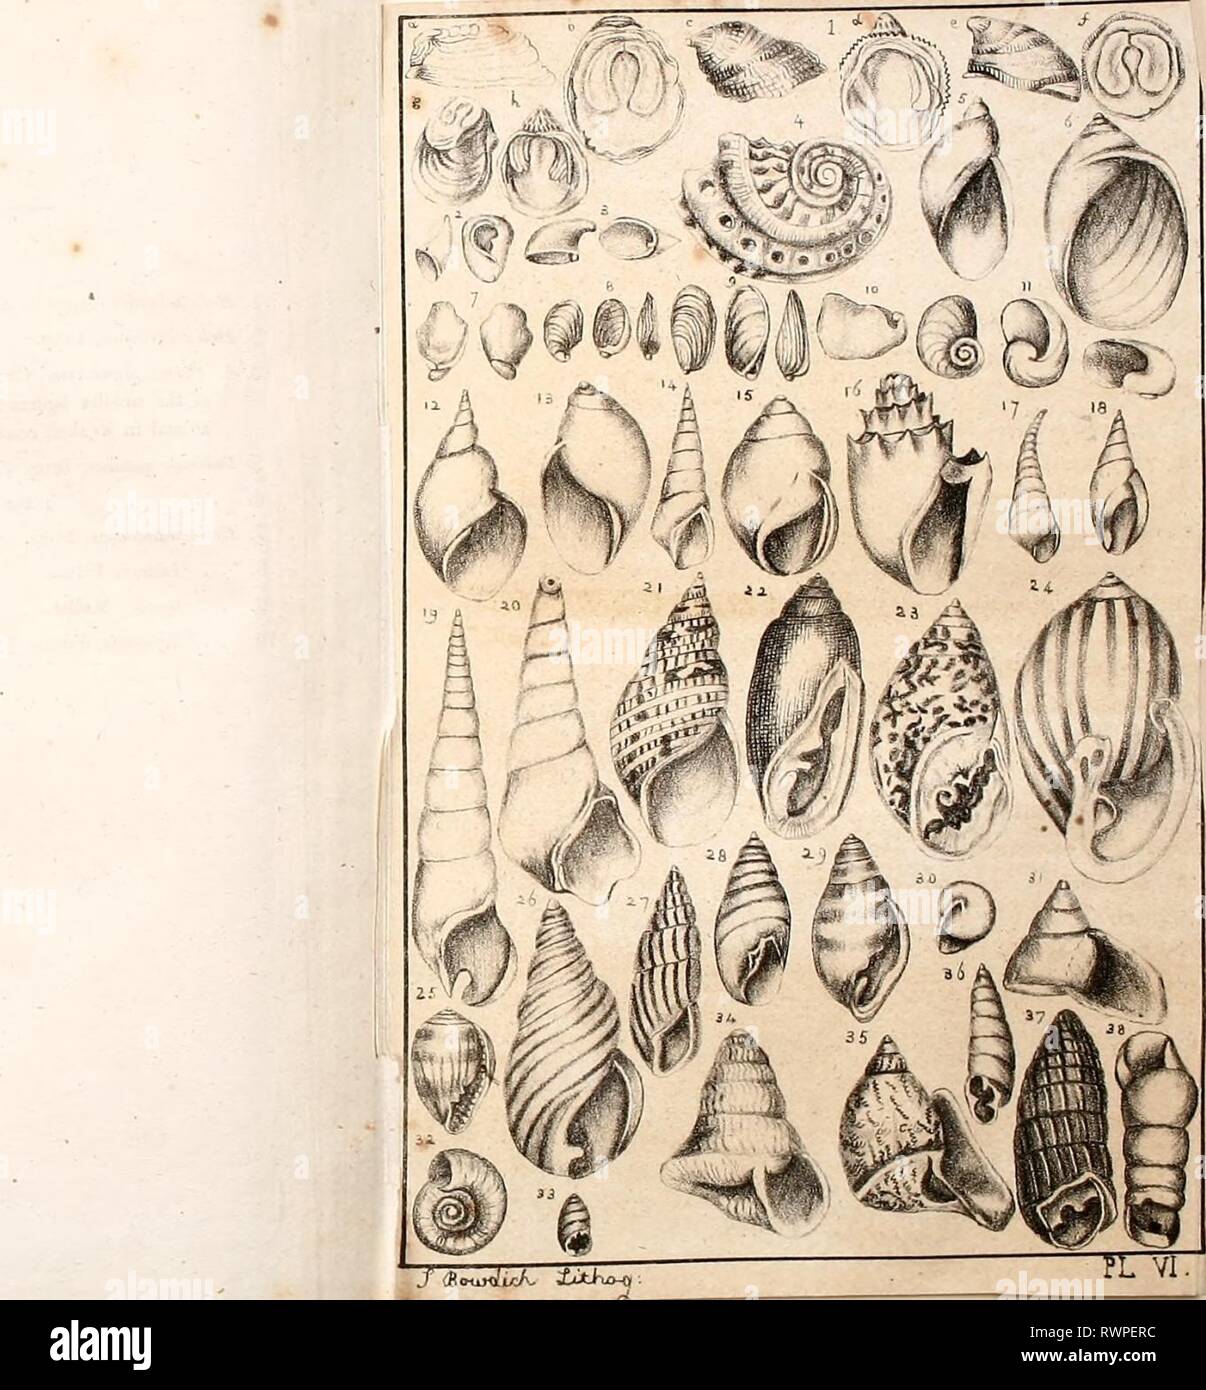 Elements of conchology  including Elements of conchology : including the fossil genera and the animals elementsofconcho00bowd Year: 1822  PLATE VI. . Hipponyx cornucopias. Defr. a. In profile, 1-2. b. Shewing the support within, 1-2. c. In profile, without the support, 1-2. I d. Seen within. e. On its support, as it was found. f. The support seen within. g. Hipponyx mitrala, Defr. a recent shell, with its support. Jt. Hipponyx cornucopia?, shewing the mouth. 2. Plectrophorus costalus, Feruss. 3. . . orbignii, Feruss. 4. Padollus scalaris, Leach. 5. Ambrettc Succinea, Drap. (Amphibidima, Lain. Stock Photo